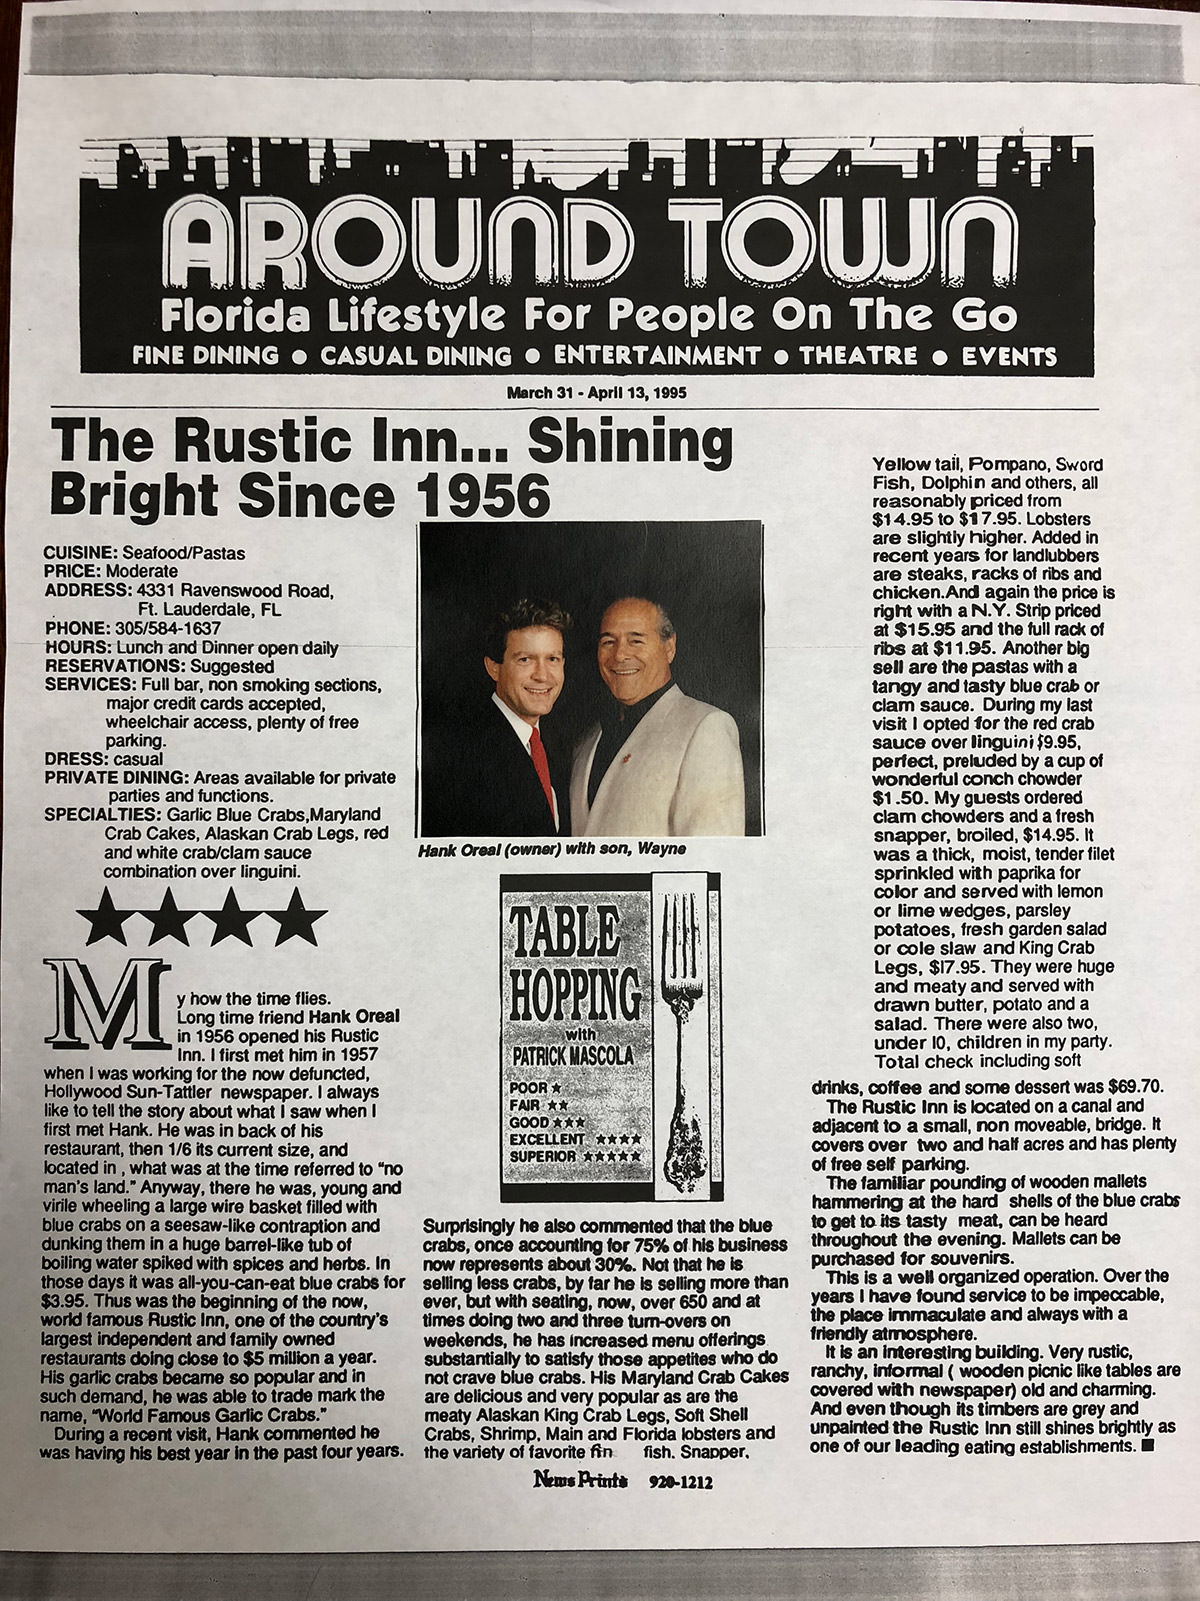 Around Town - The Rustic Inn... Shining Bright Since 1956